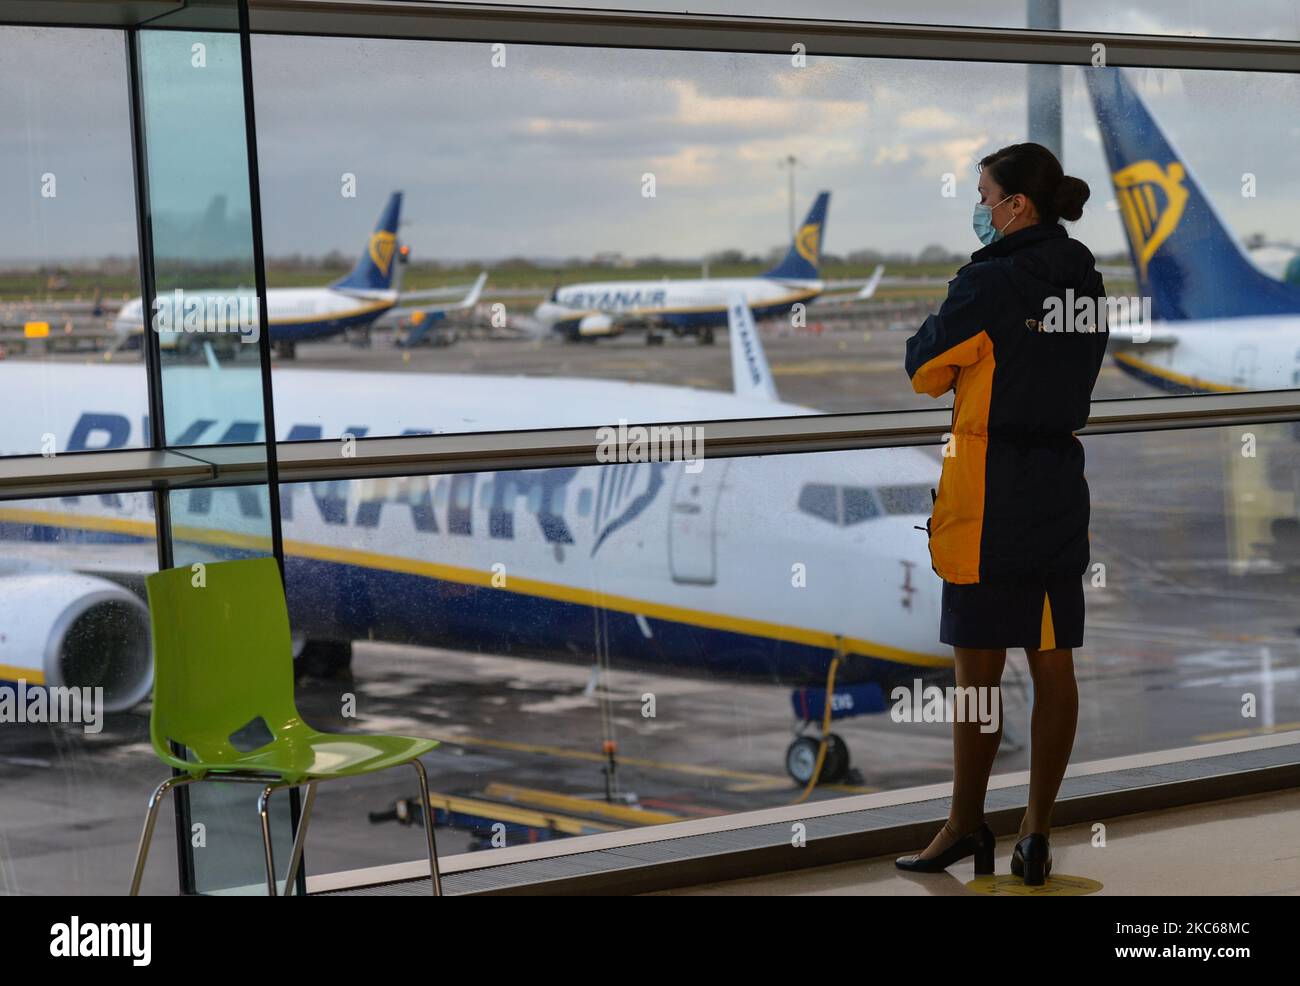 A member of Ryanair cabin crew looks out of the window at Ryanair planes grounded at Dublin Airport (file picture December 5). From midnight all flights and passenger ferries from Britain to Ireland will be suspended for an initial period of 48 hours in an effort to stop the spread of a new coronavirus strain to Ireland. On Sunday, December 20, 2020, in Dublin, Ireland. (Photo by Artur Widak/NurPhoto) Stock Photo